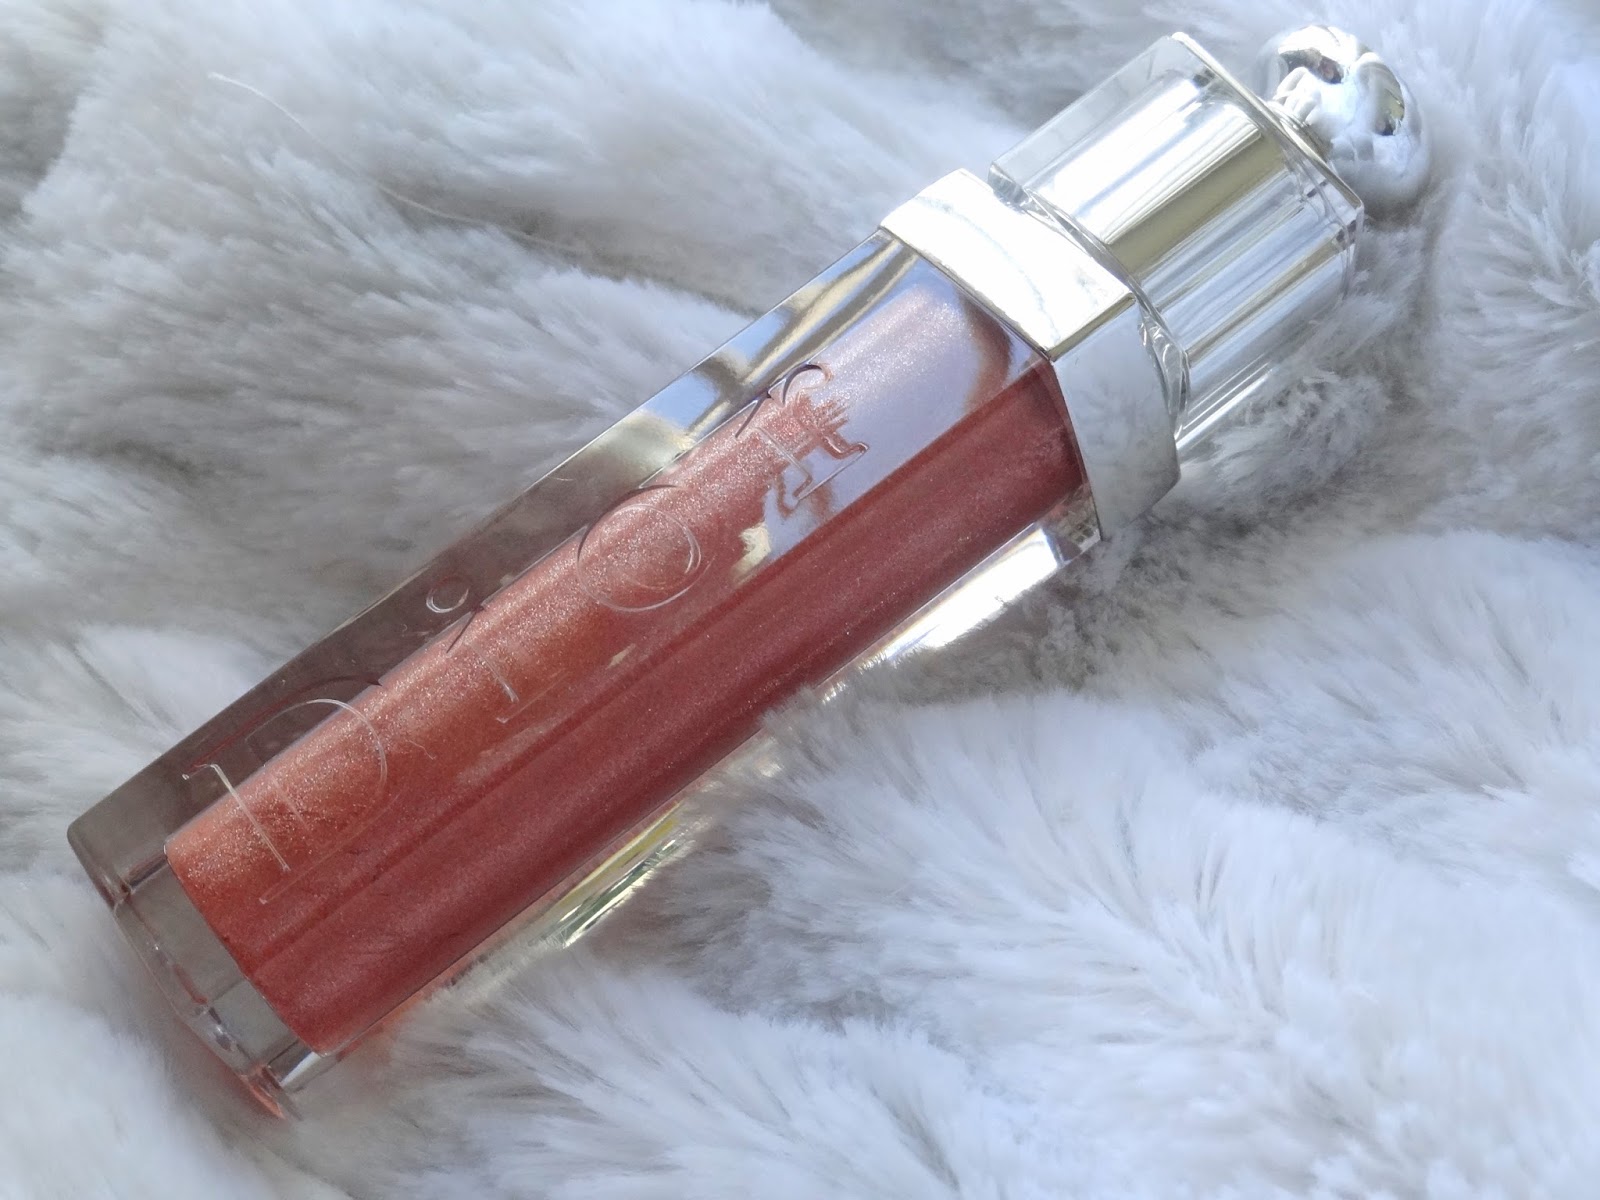 Makeup, Beauty and More: Dior Addict Ultra Gloss in Mirrored 626